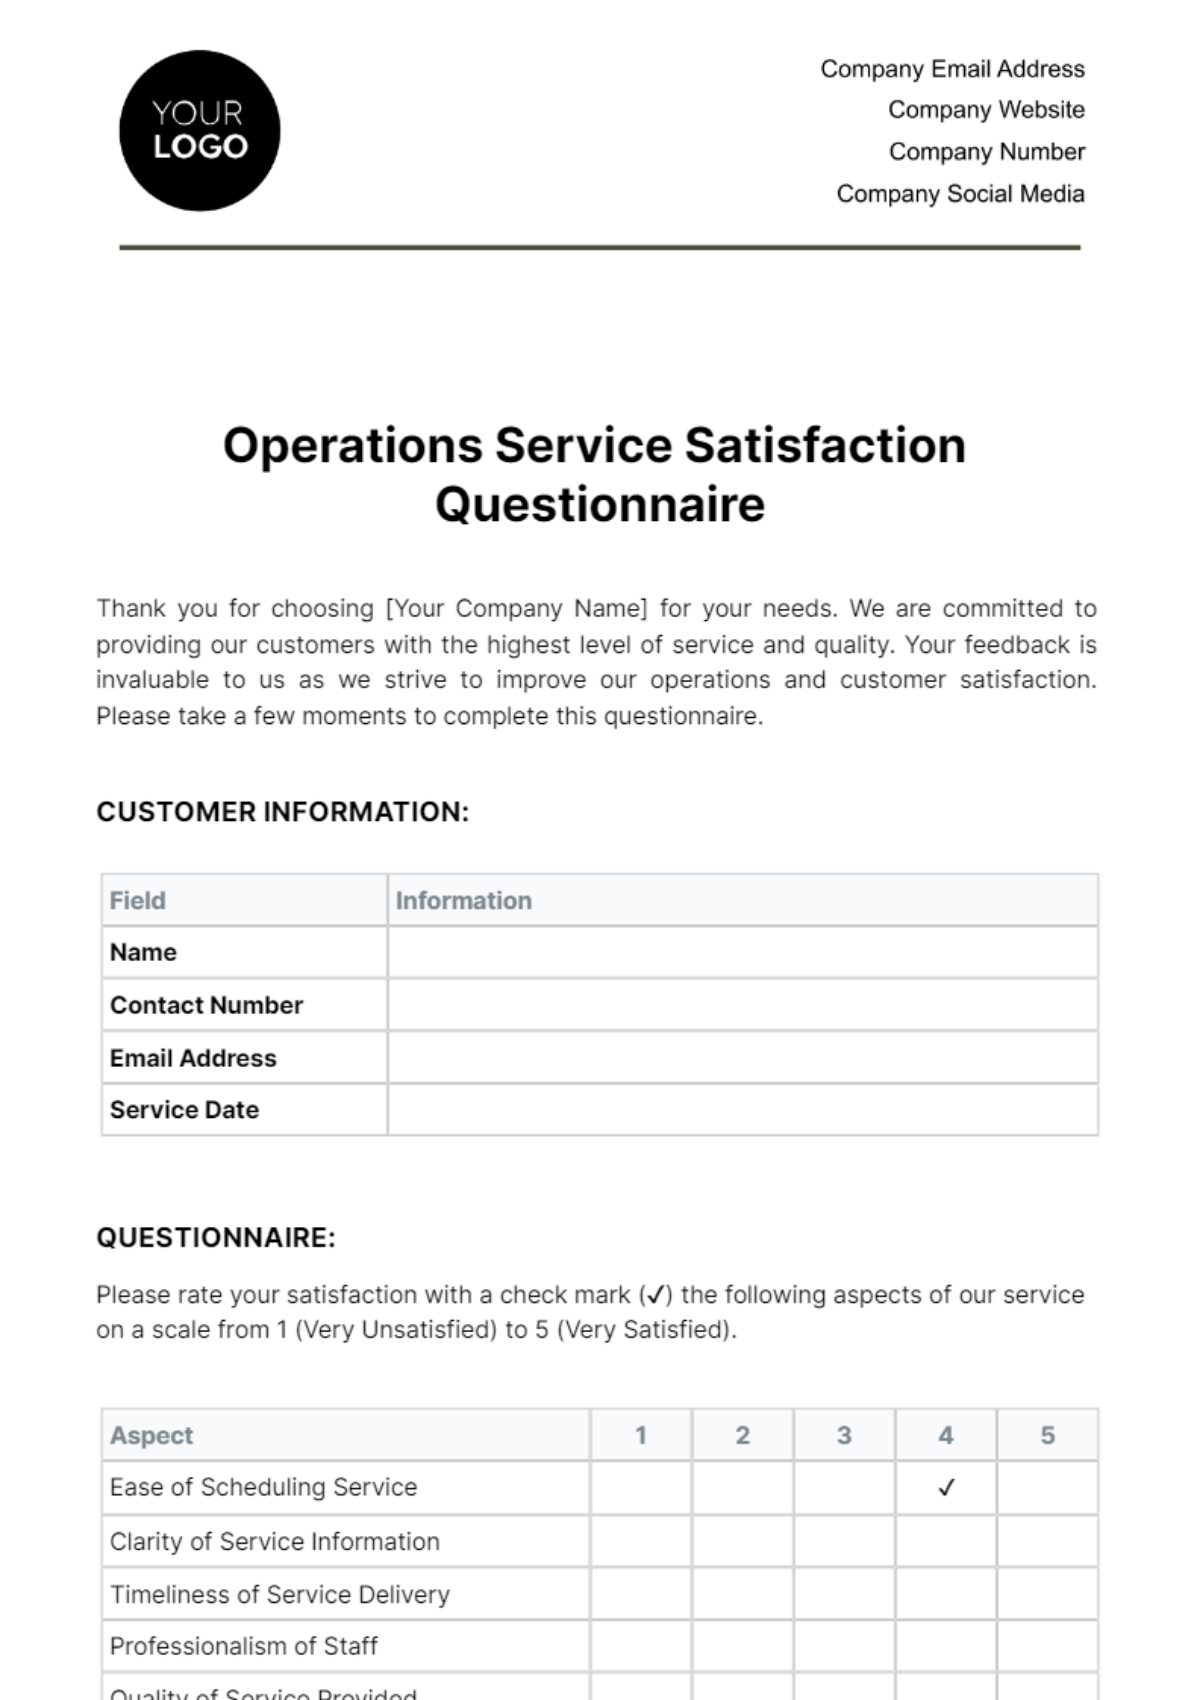 Operations Service Satisfaction Questionnaire Template